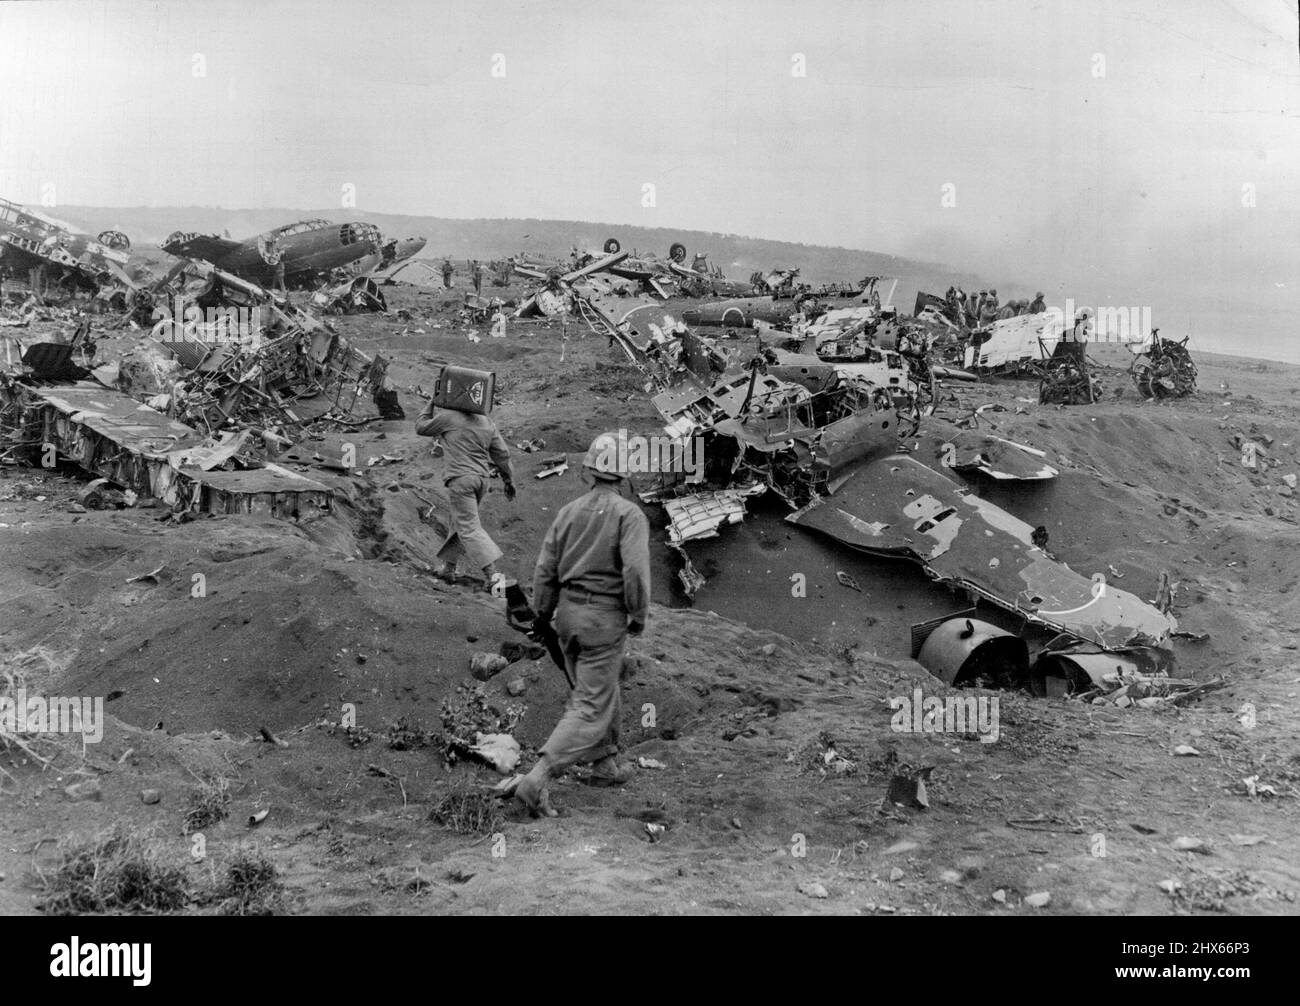 Junkpile Of Wrecked Jap Planes On Iwo -- This Junkpile of wrecked Japanese planes alongside Motoyamo Airstrip No.1 on Iwo Jima represents Havoo wrought by pre-invasion aerial bombings and naval shelling from U.S. forces. This picture was made by Joe Rosenthal Associated Press Staff Photographer on assignment with the wartime still picture pool. March 15, 1945. (Photo by Associated Press Photo). Stock Photo